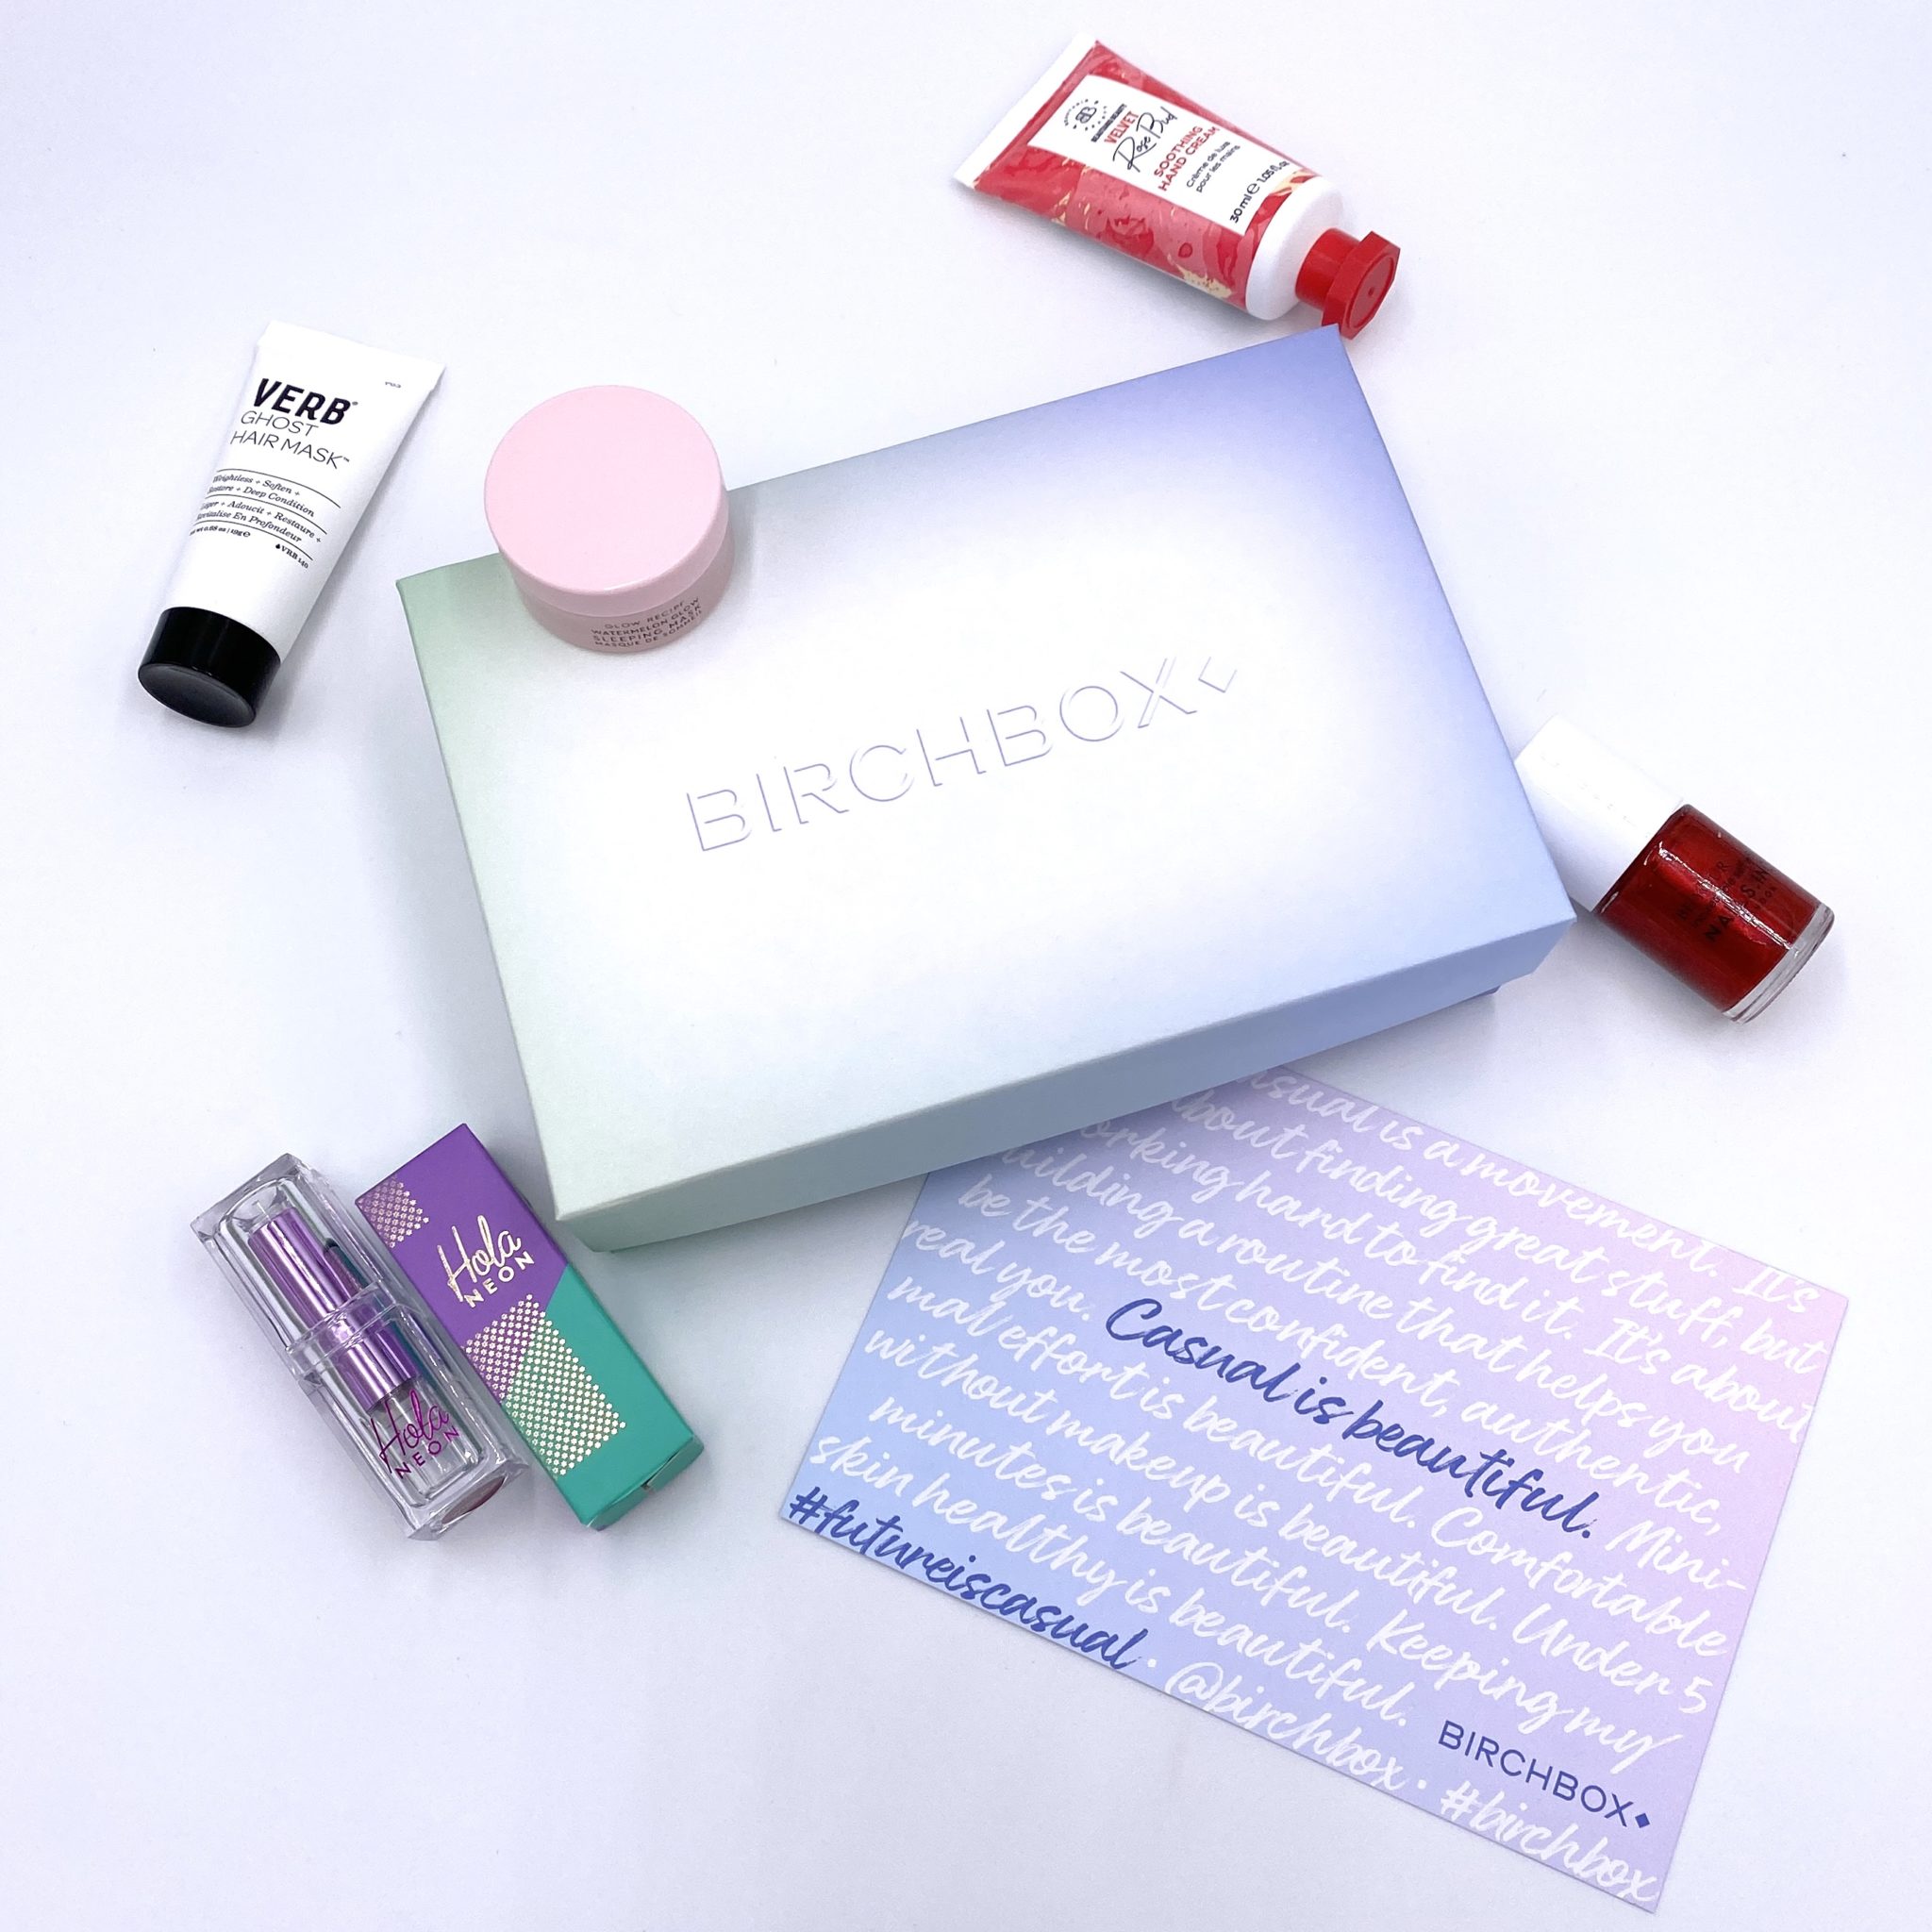 The 16 Best Makeup Subscription Boxes 2020 Readers' Choice MSA